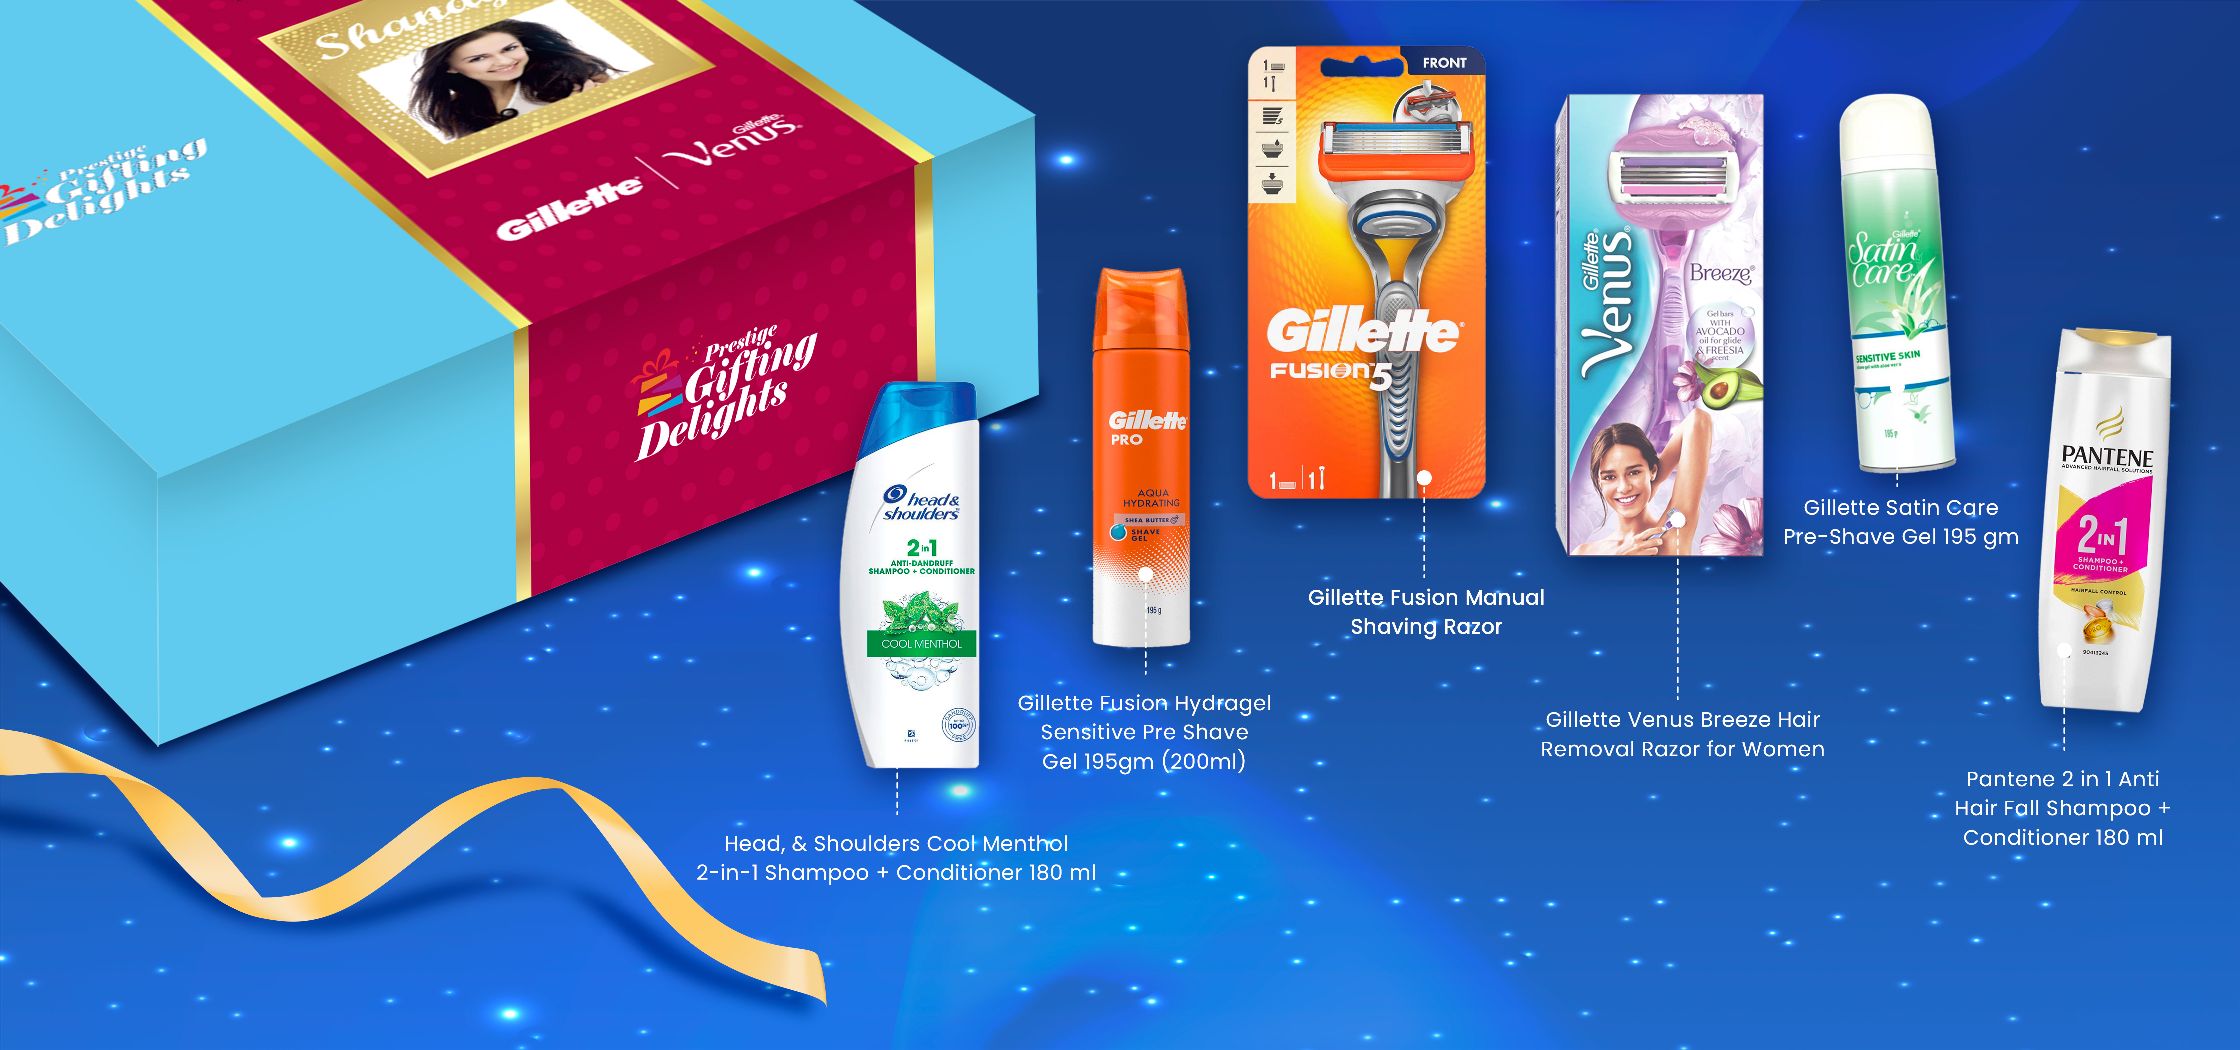 Gillette Venus + Fusion Manual Shaving & Haircare Happy Birthday Kit For Him And Her